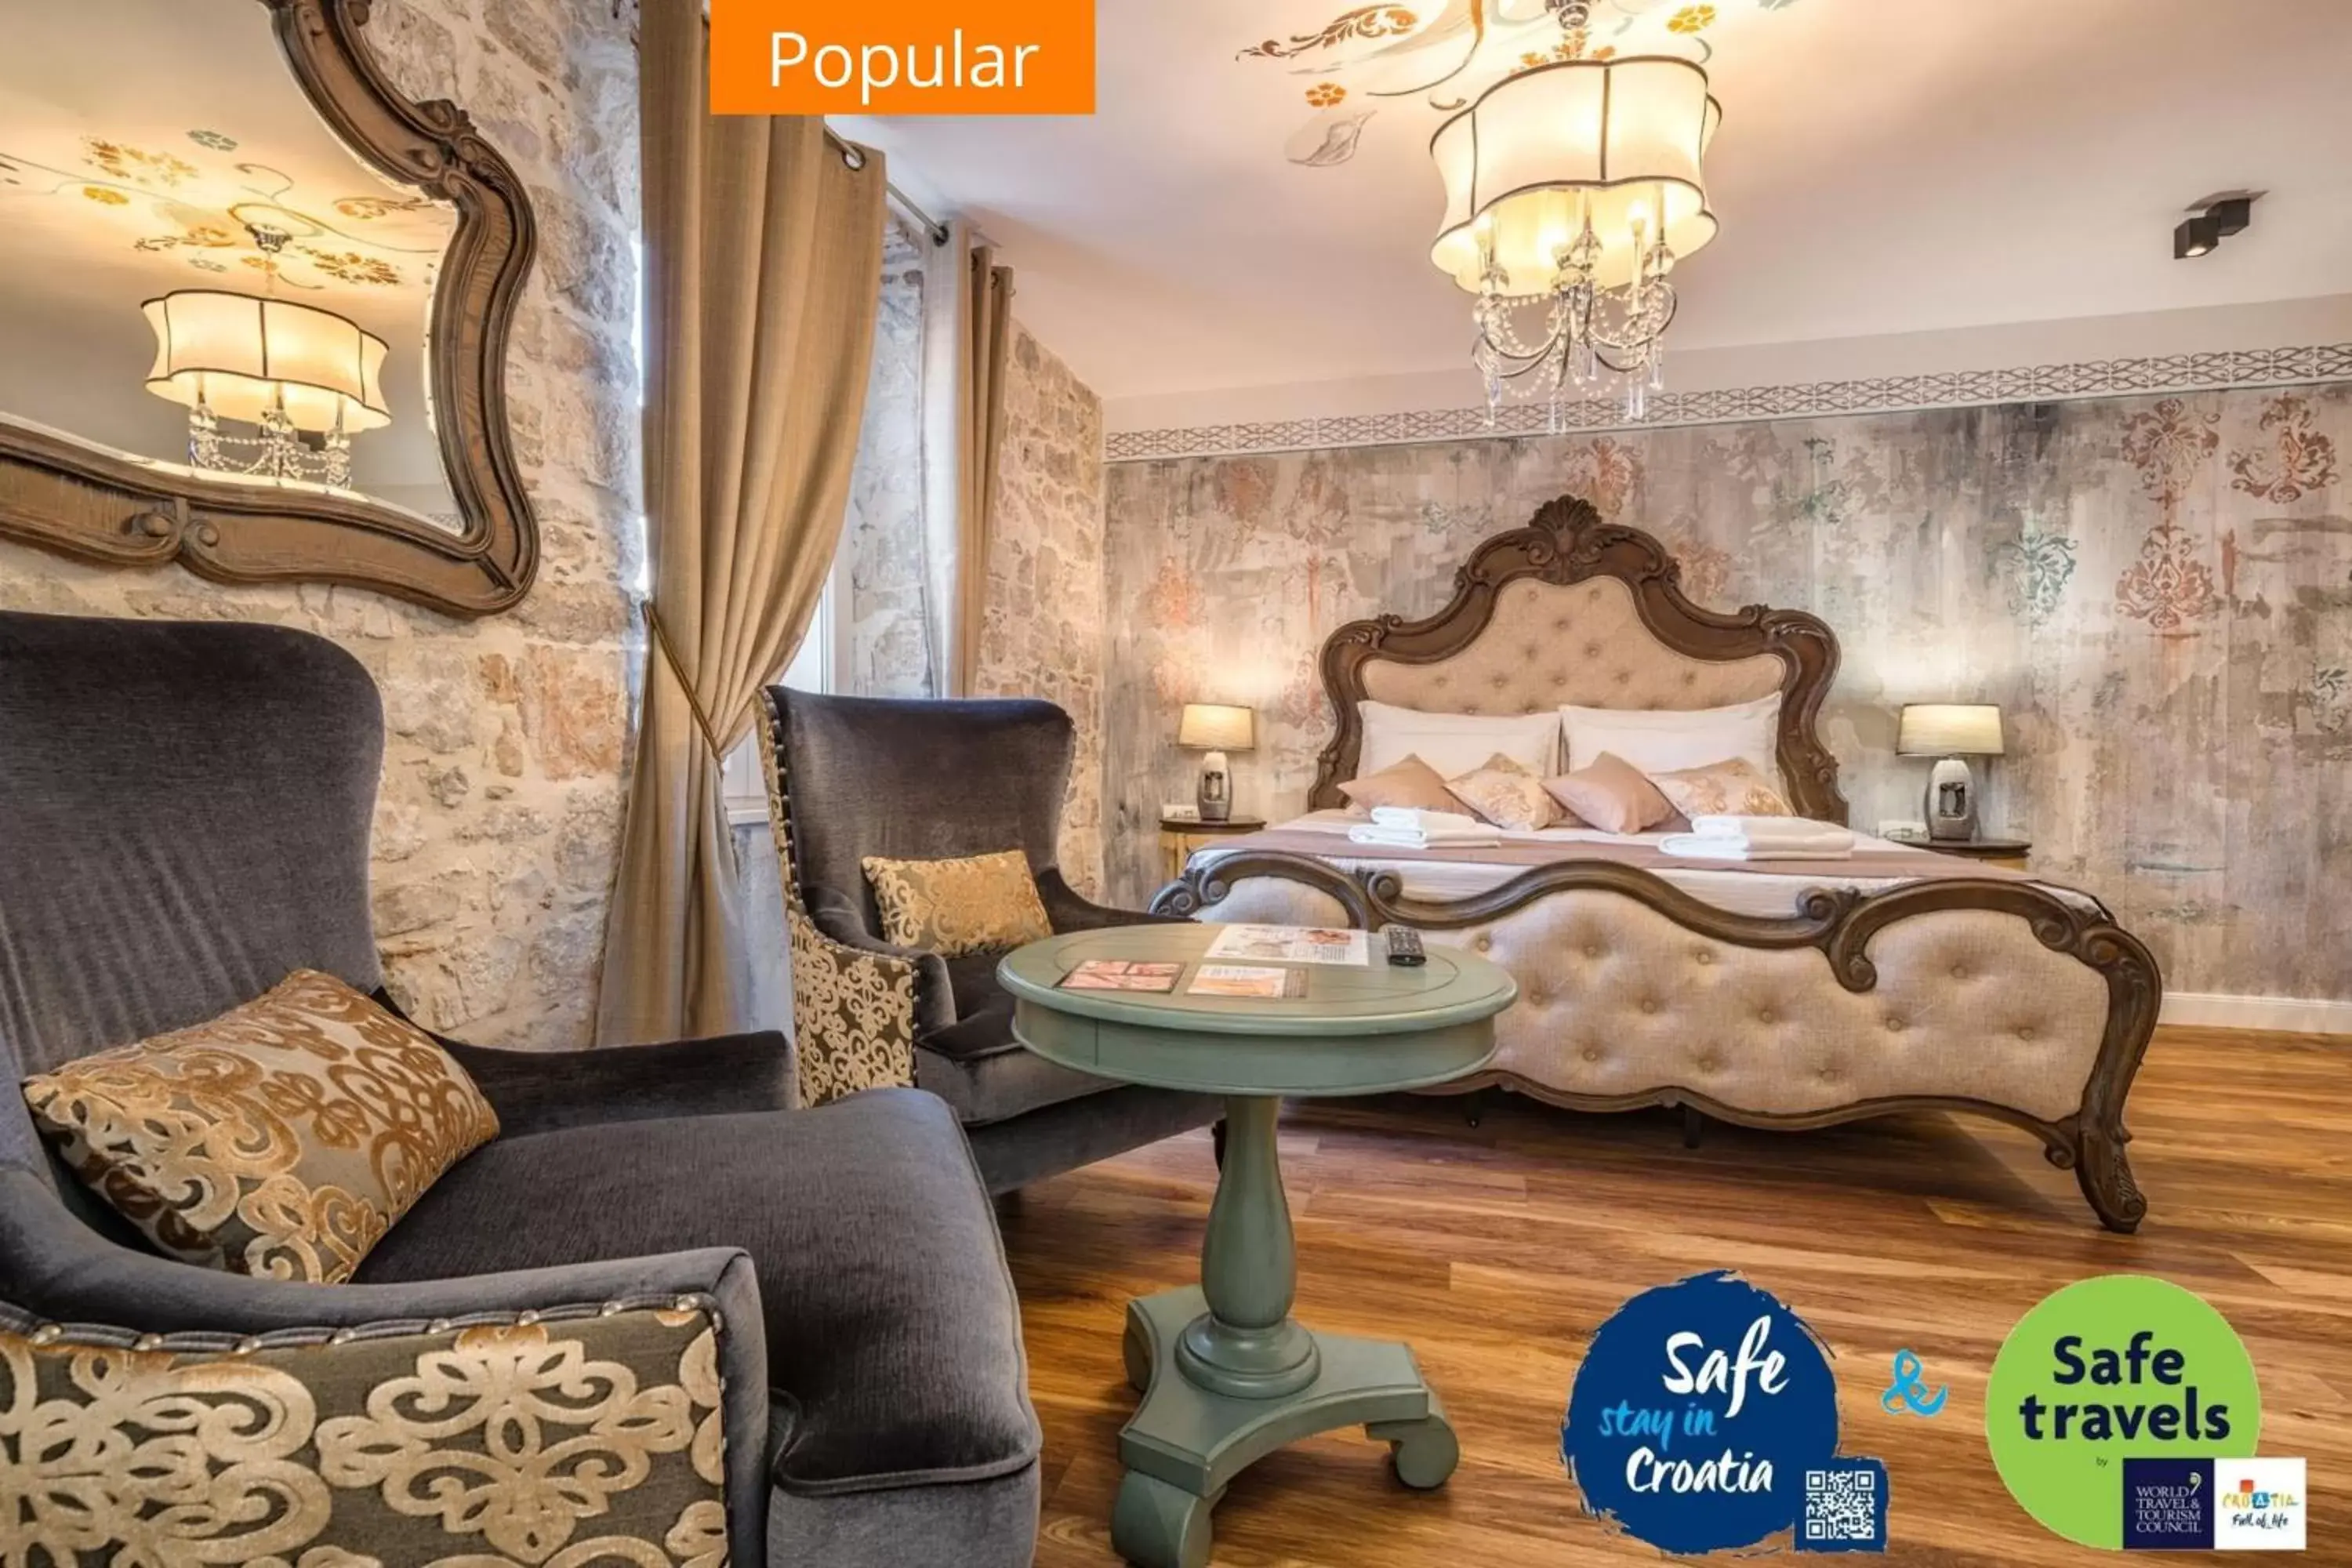 Property building in Plaza Marchi Old Town - MAG Quaint & Elegant Boutique Hotels